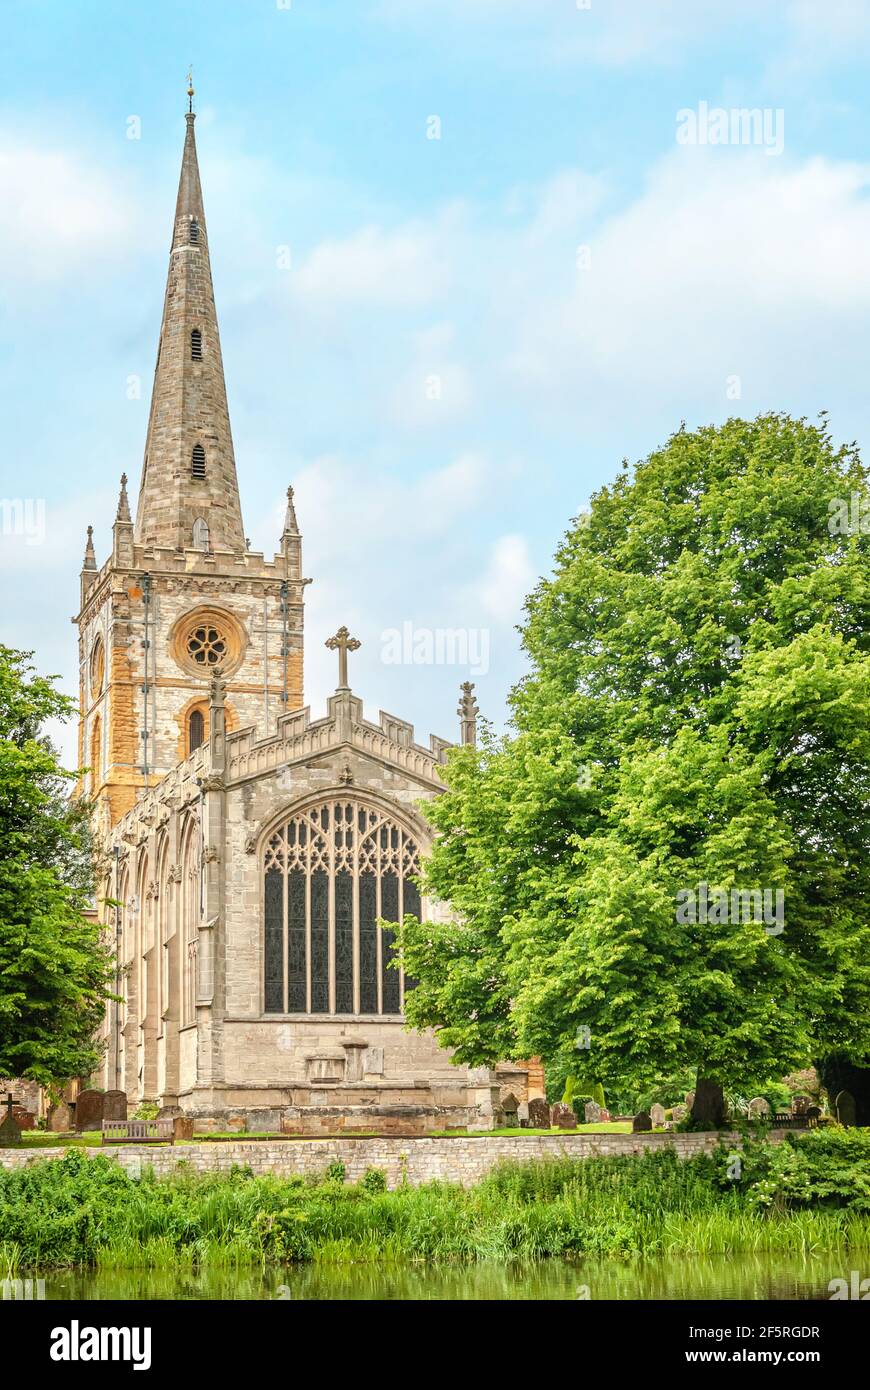 The Church of the Holy and Undivided Trinity, Stratford-upon-Avon, England, UK Stock Photo